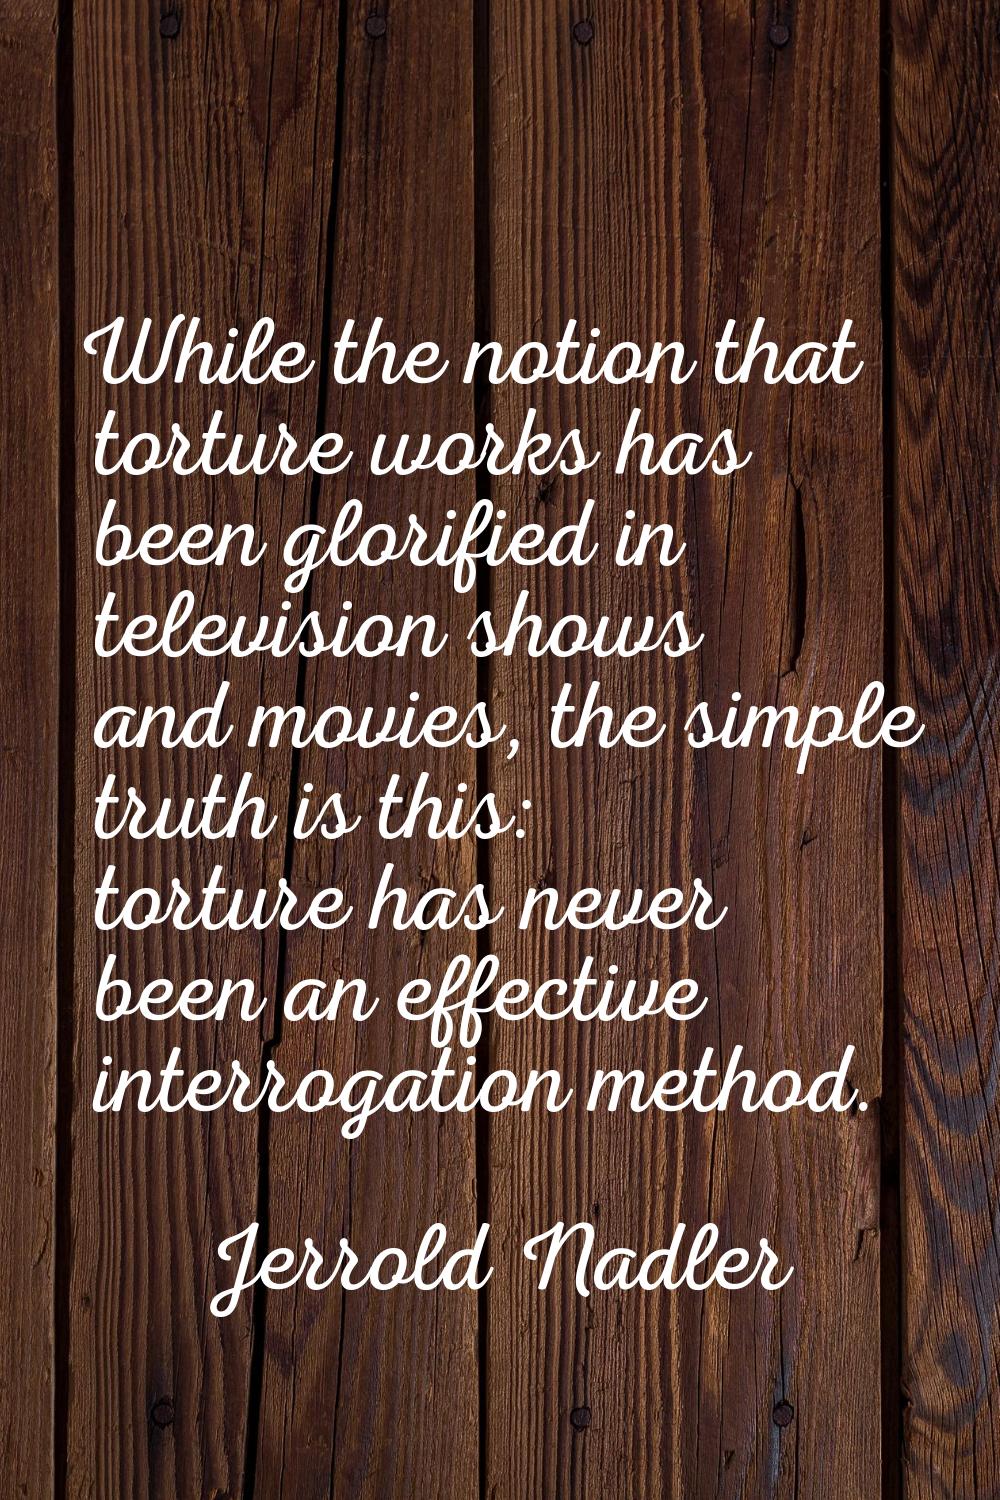 While the notion that torture works has been glorified in television shows and movies, the simple t